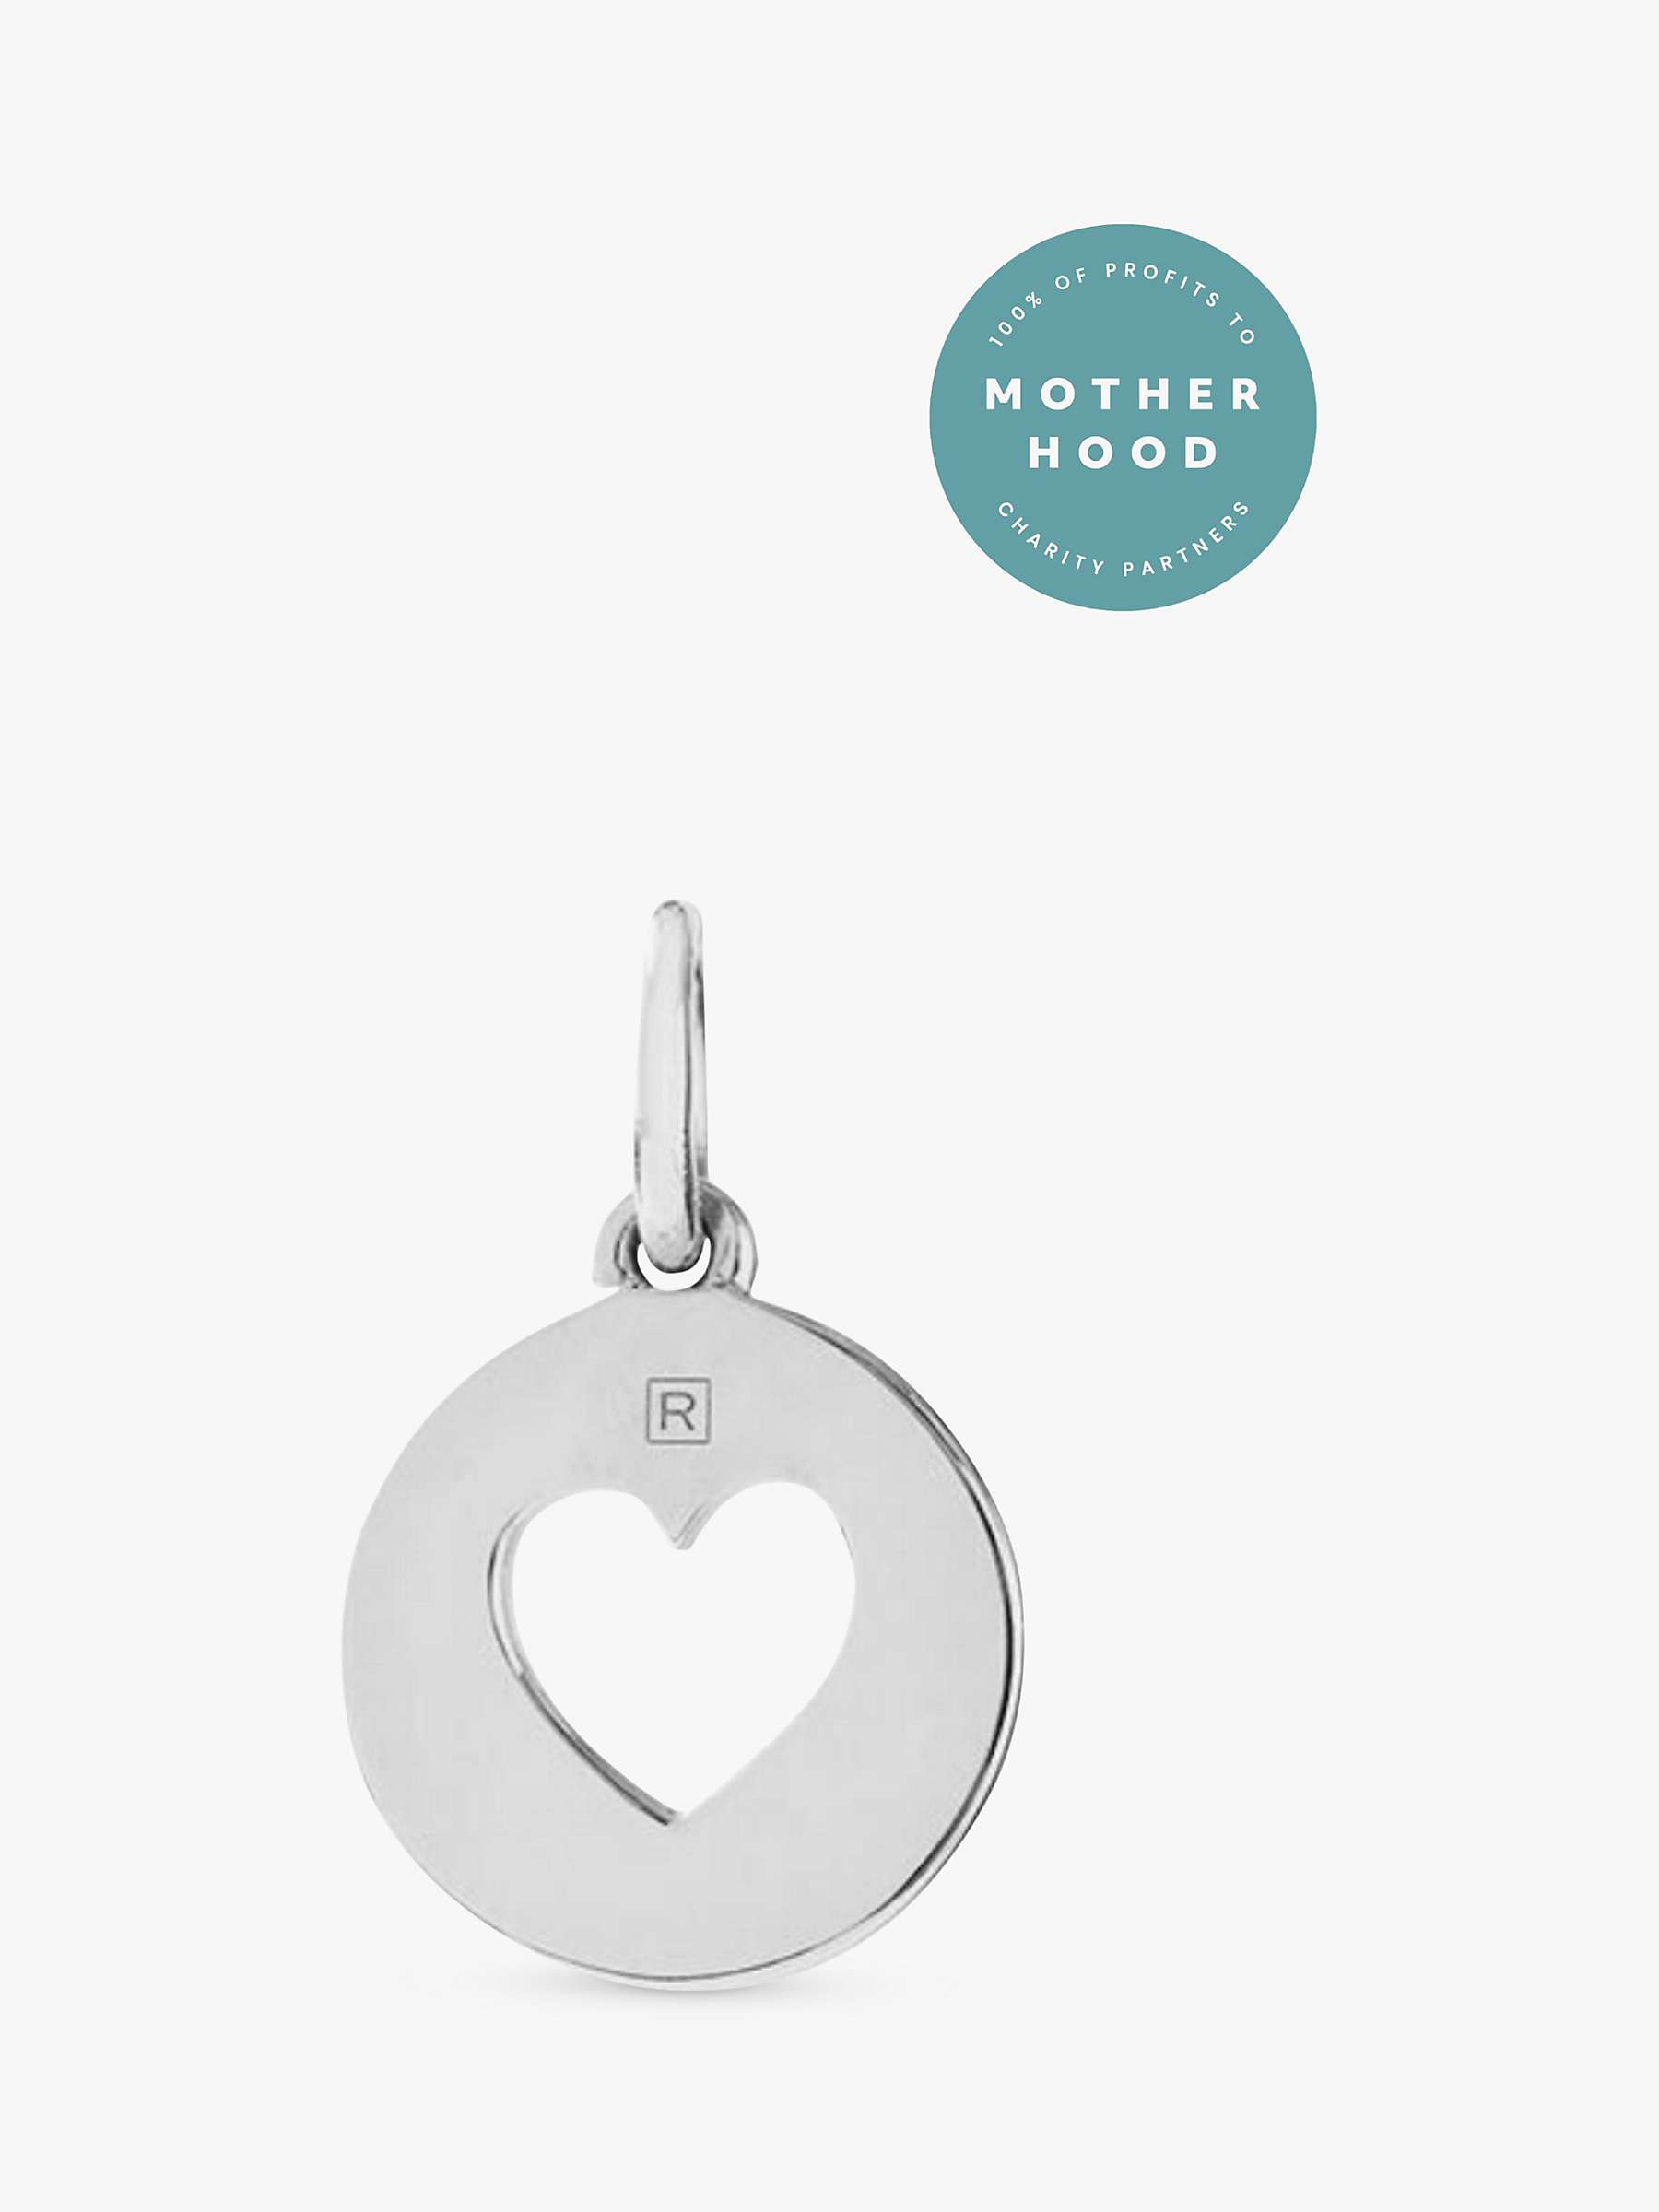 Buy Recognised Heart Popon Pendant Necklace, Silver Online at johnlewis.com